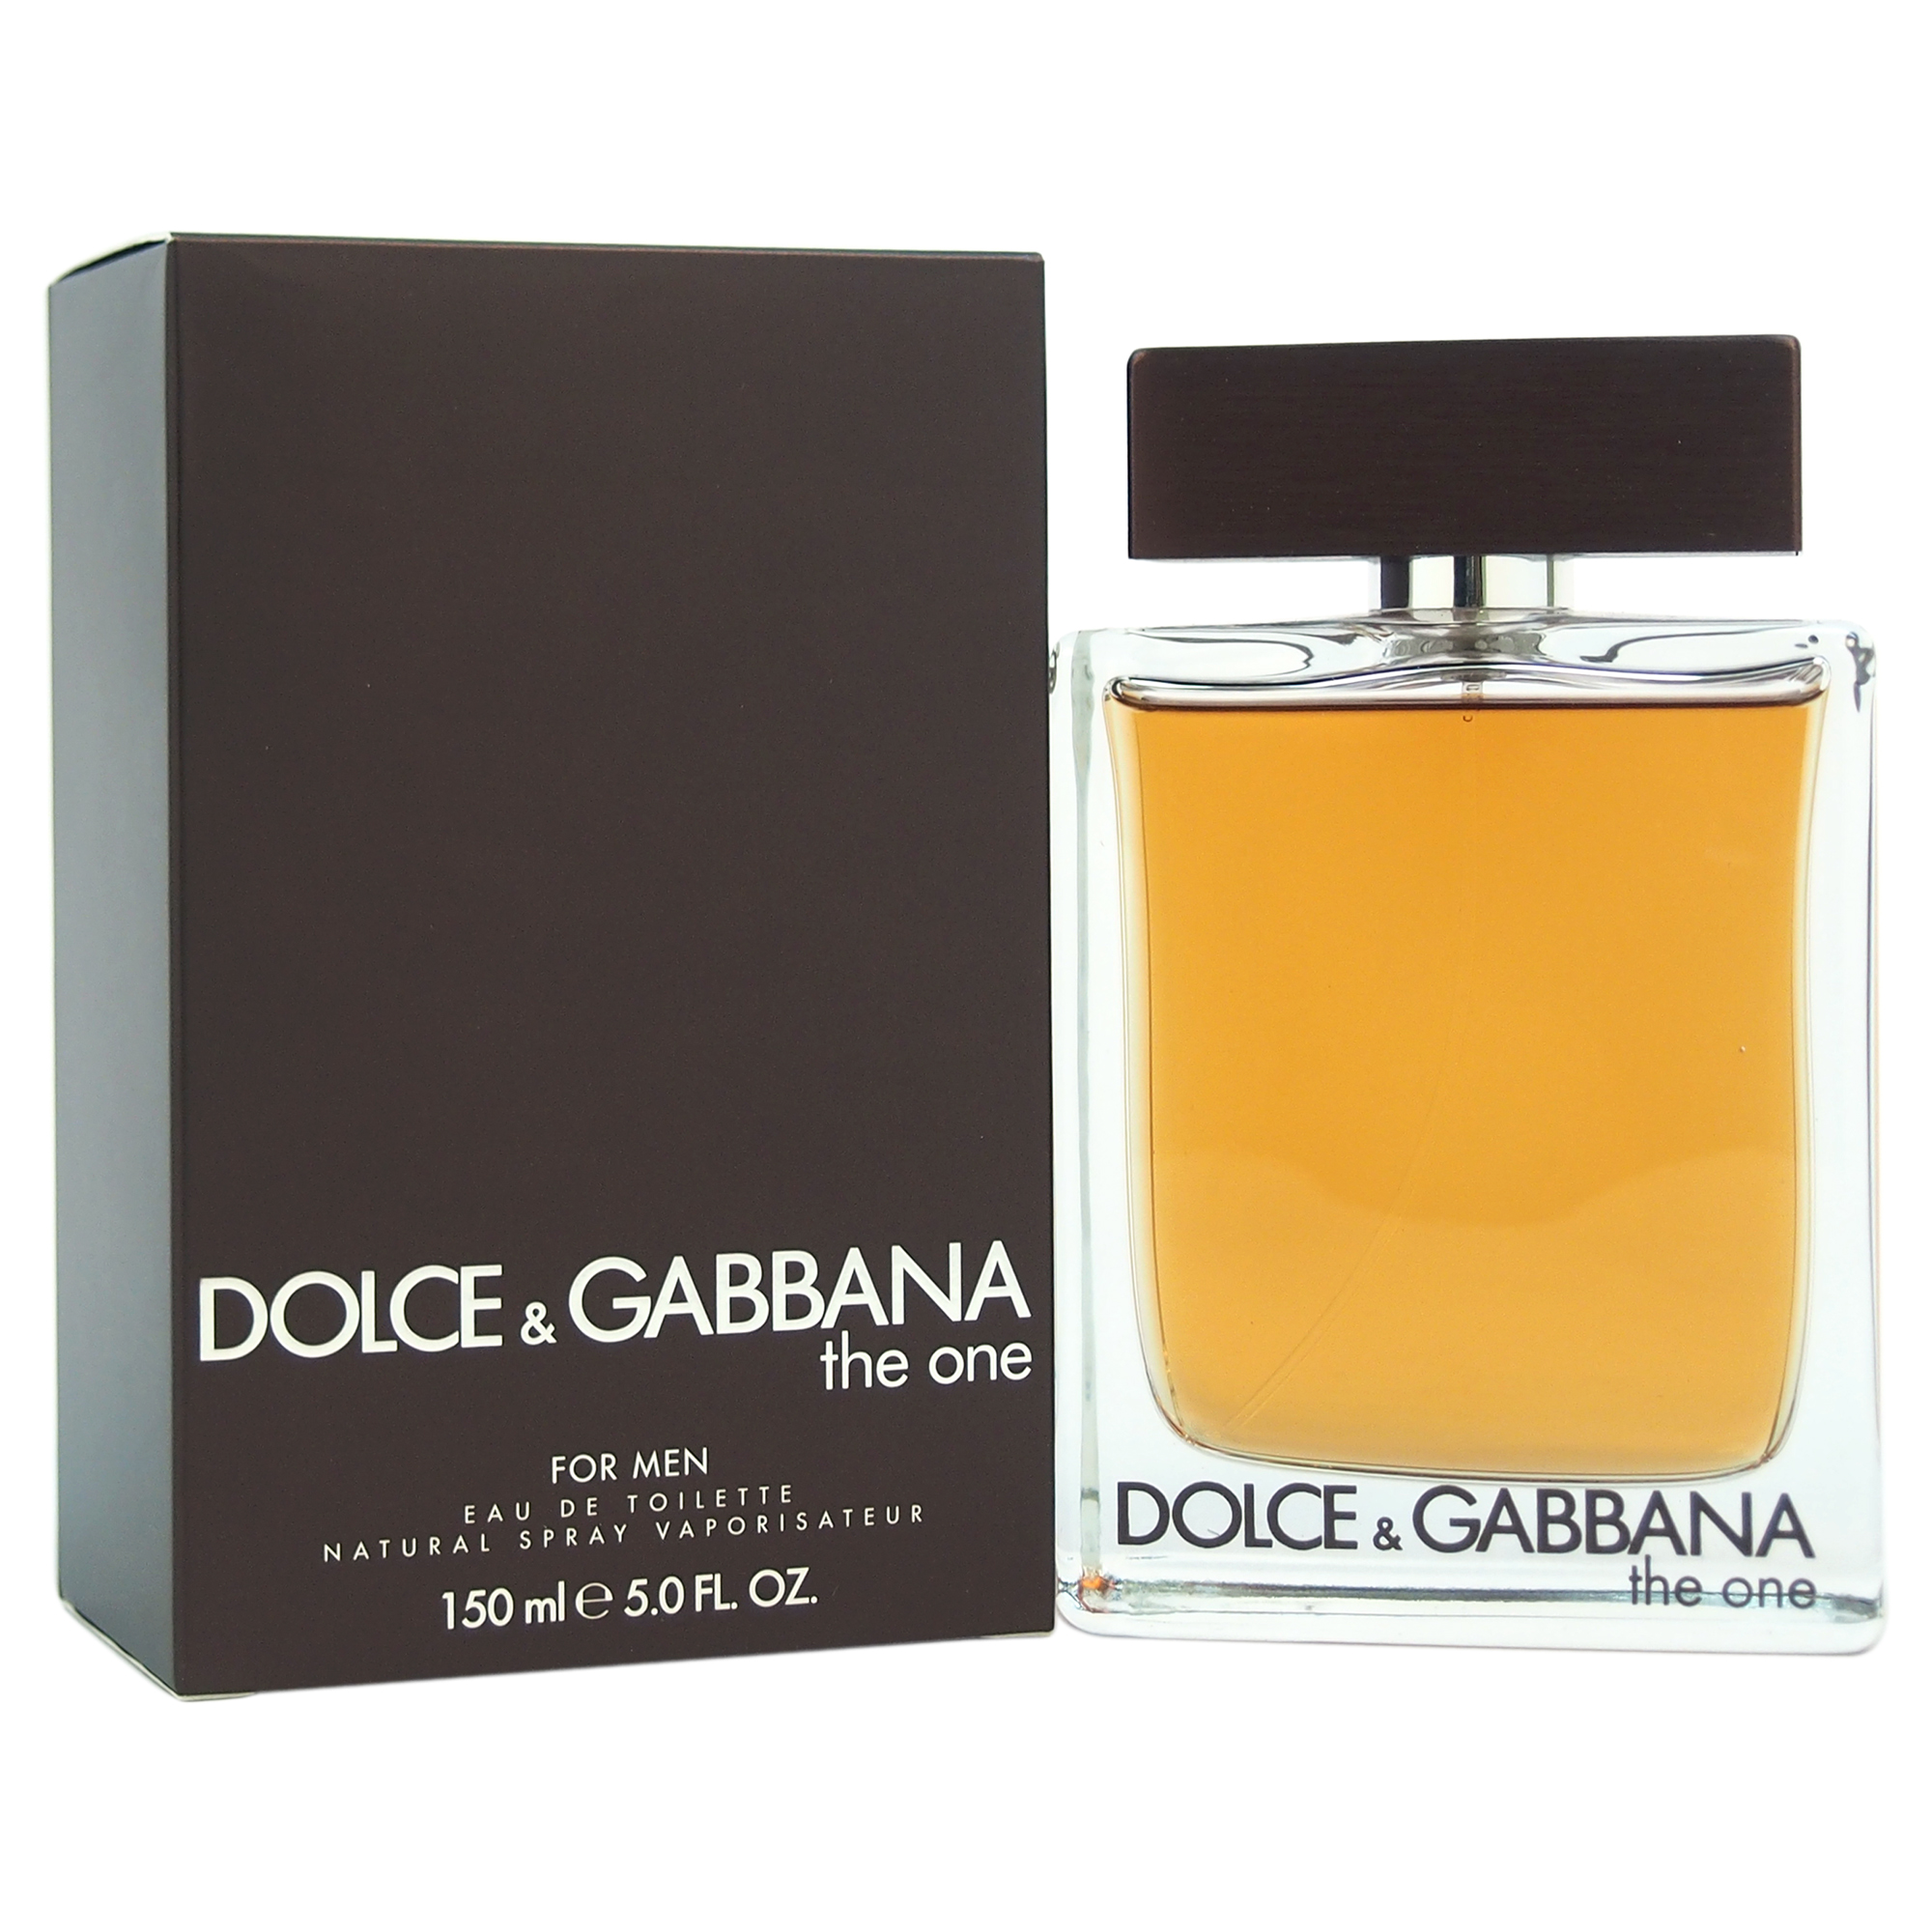 The One by Dolce & Gabbana for Men - 5 oz EDT Spray